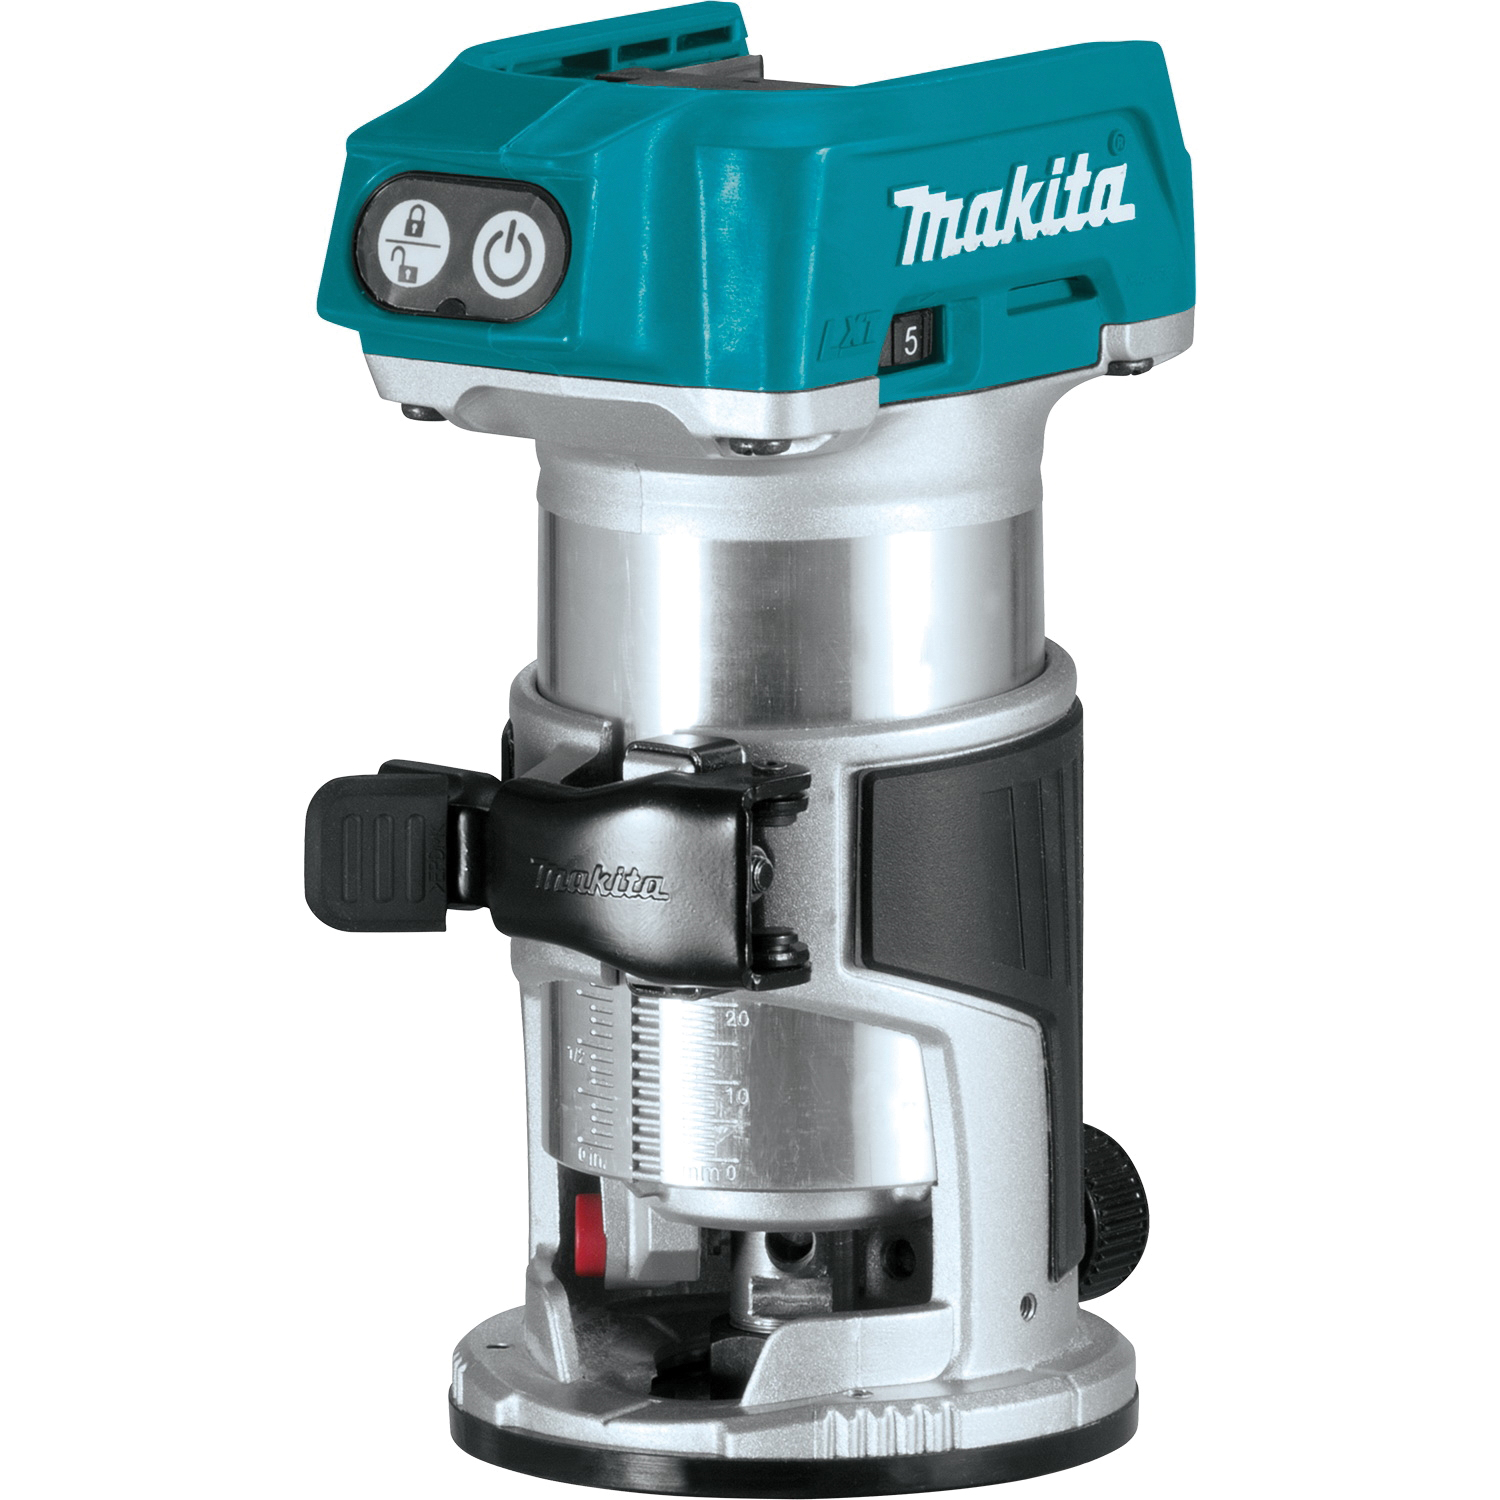 Buy Makita XTR01Z Compact Router, 18 V, 10,000 to 30,000 rpm Spindle